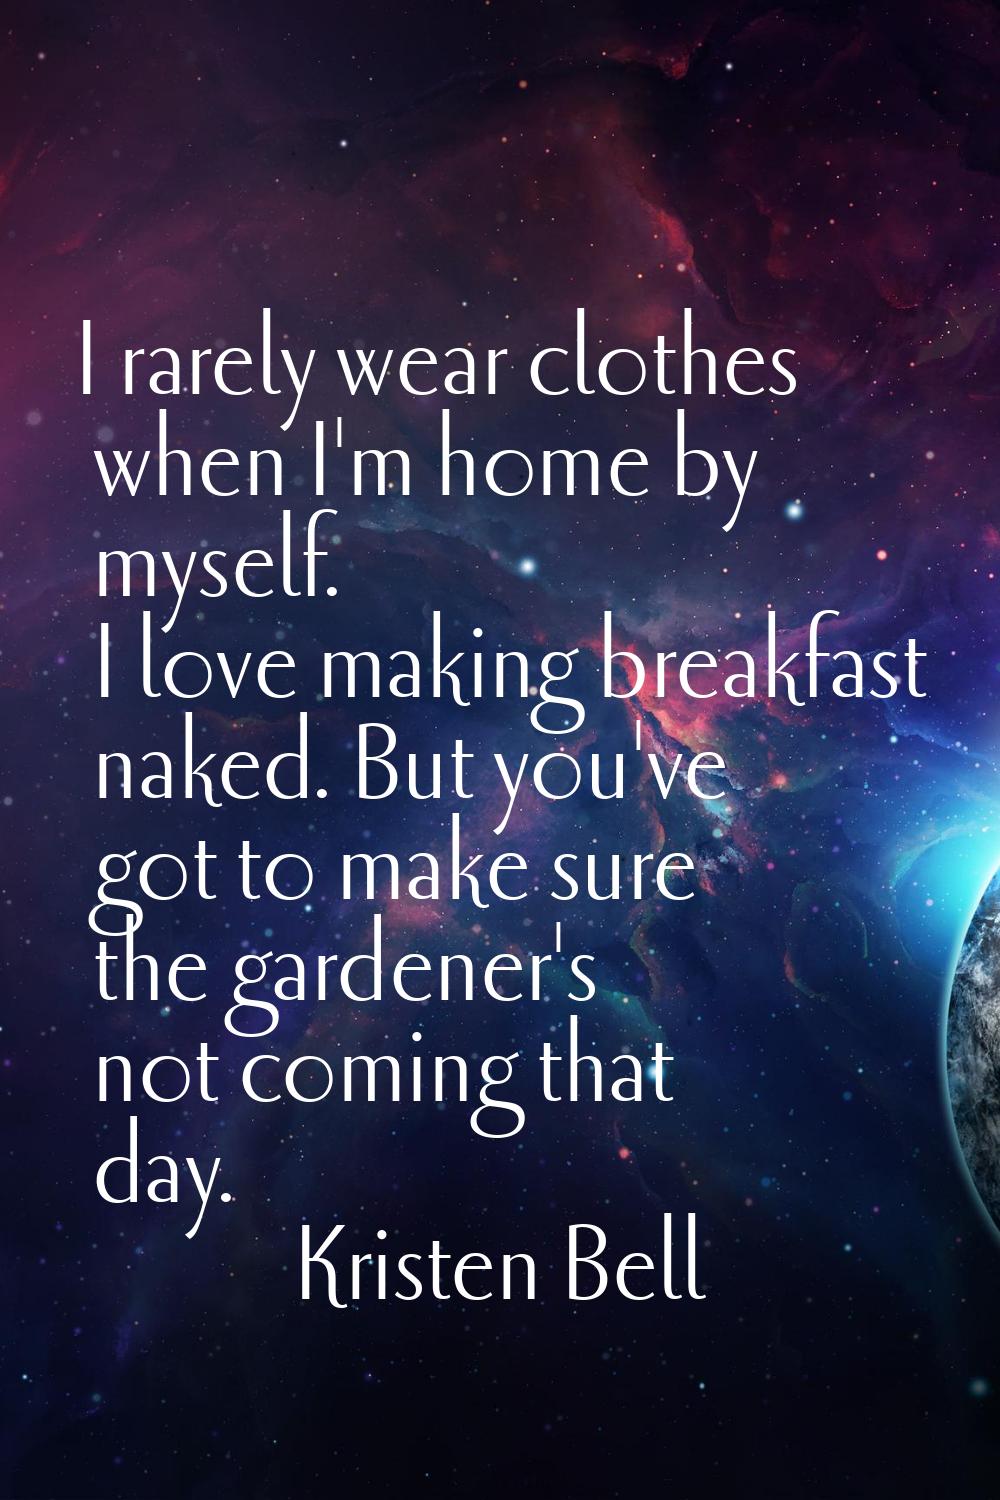 I rarely wear clothes when I'm home by myself. I love making breakfast naked. But you've got to mak